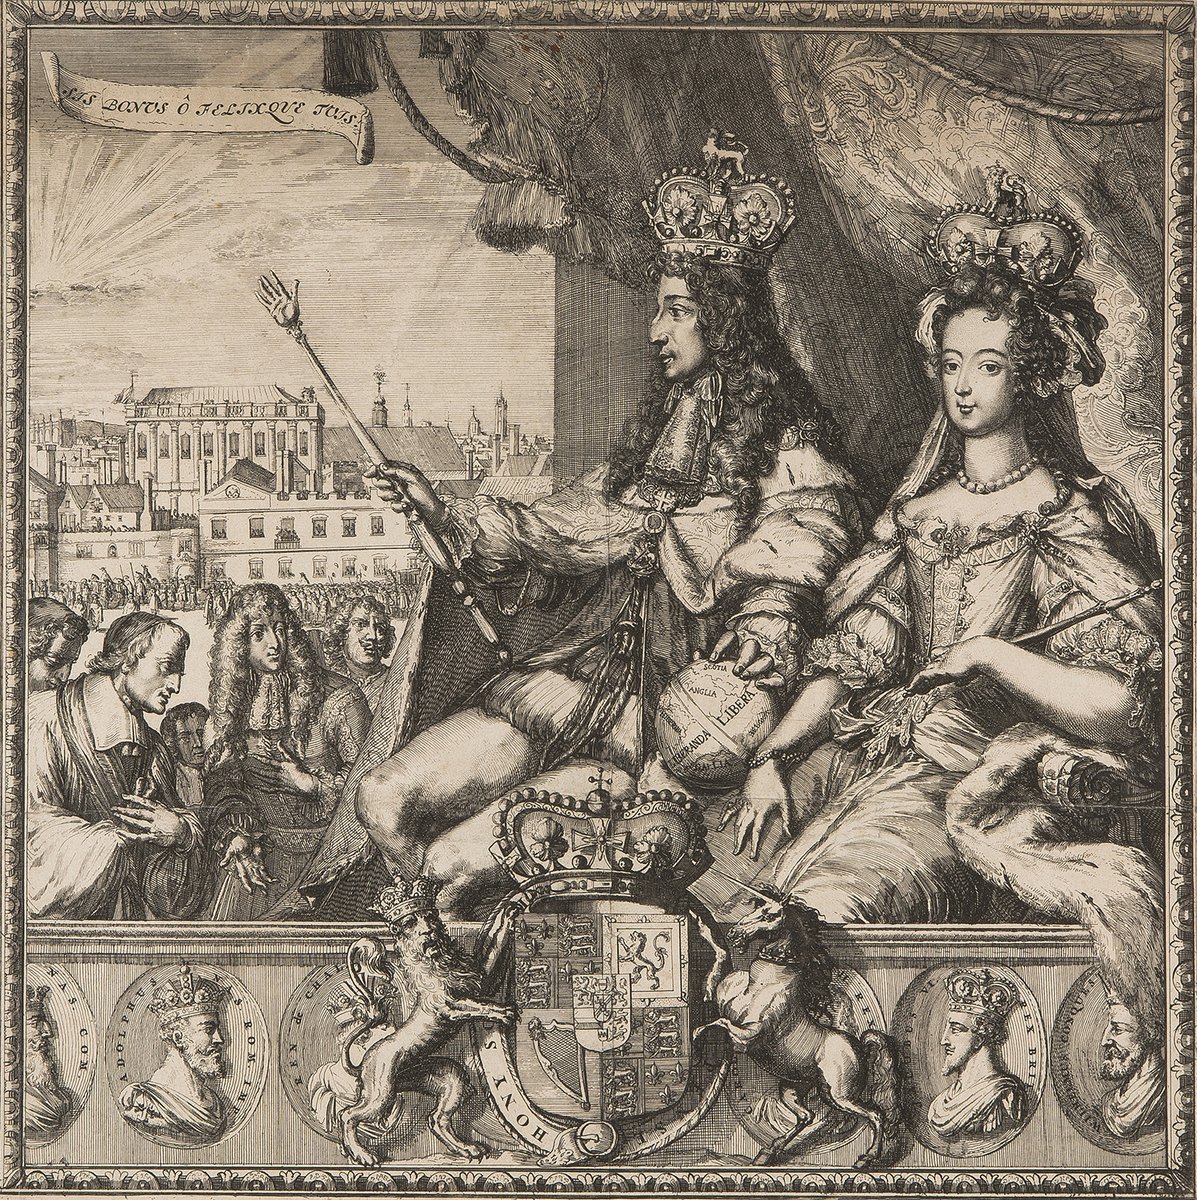 #Onthisday in 1689 William III and Mary II were crowned together at @wabbey 👑 They ruled jointly from 1689 until Mary’s death in 1694. 🎨 The arrival of William III and Mary II at Whitehall in 1688. The Banqueting House and Whitehall Palace can be seen in the background!